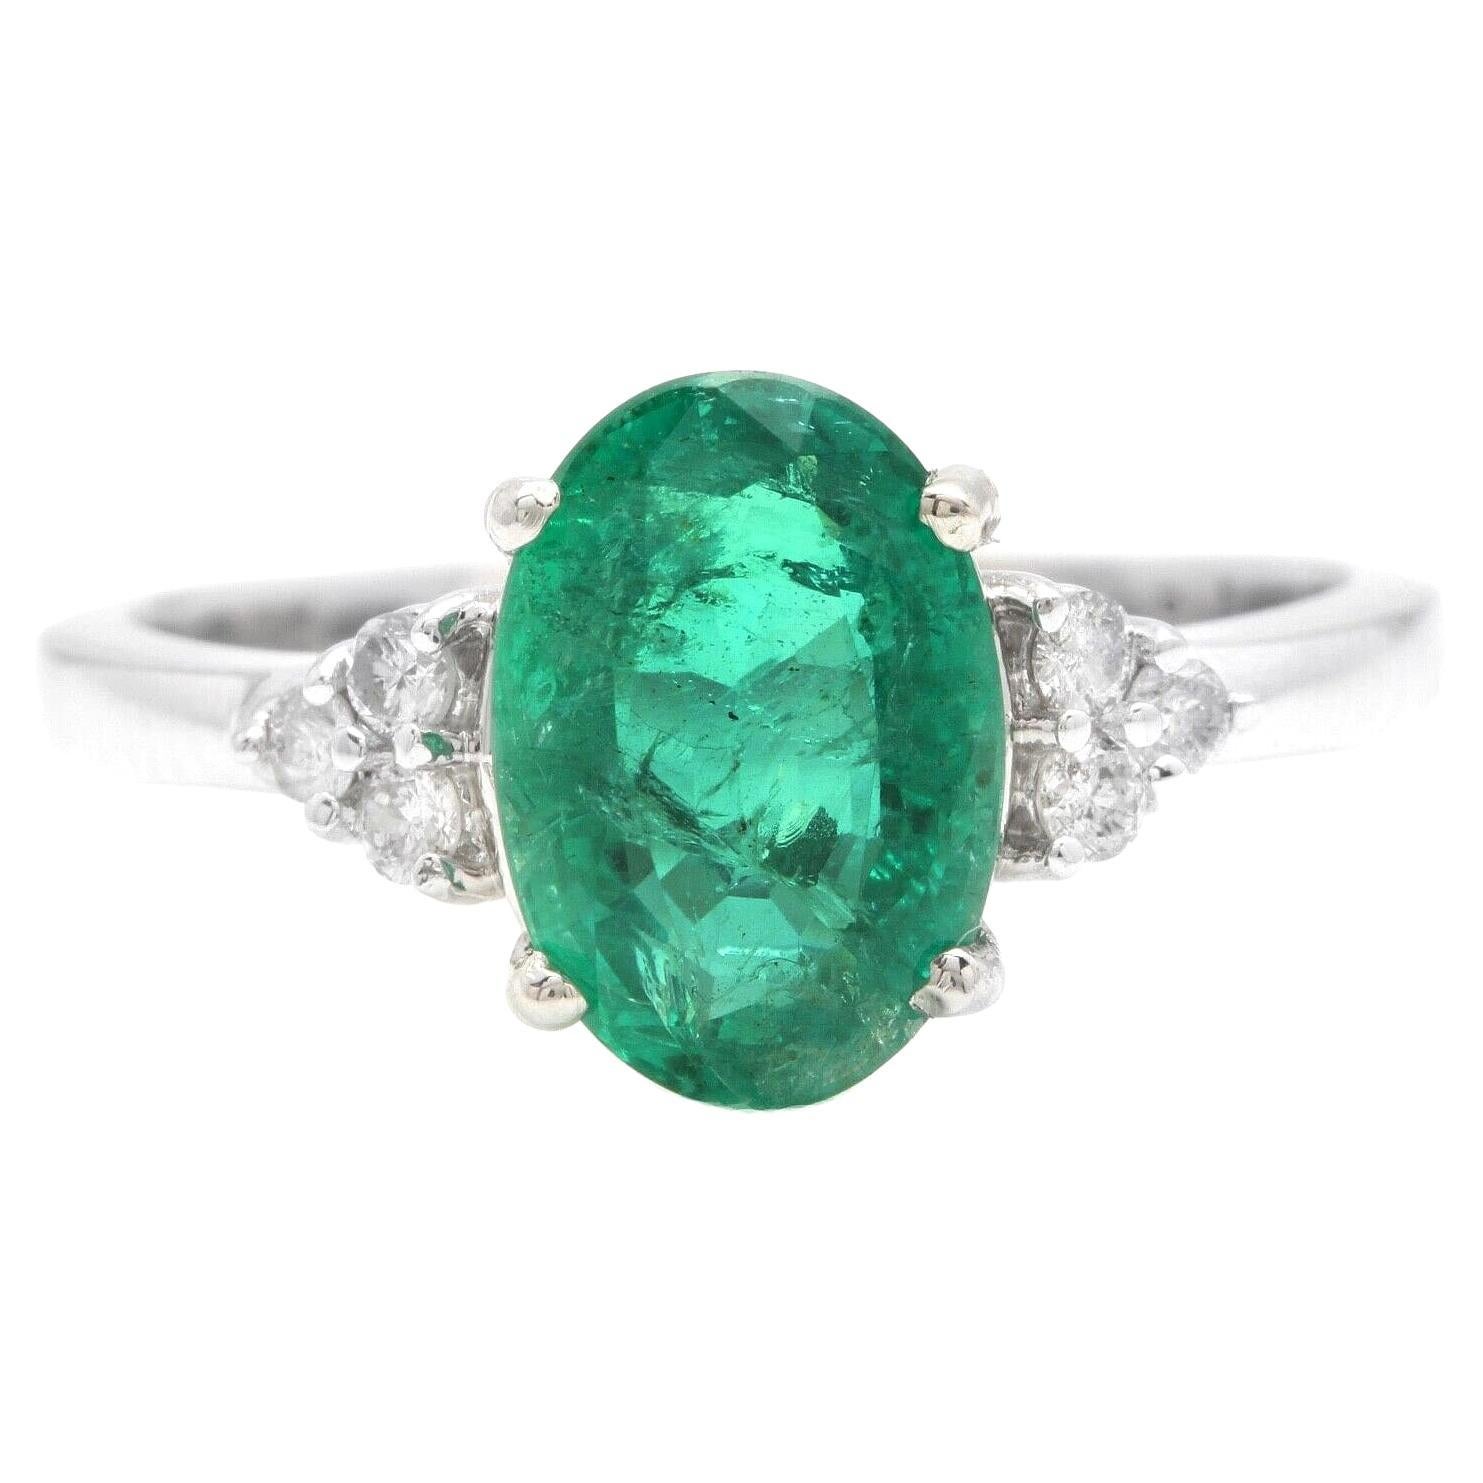 3.20 Carats Natural Emerald and Diamond 14k Solid White Gold Ring